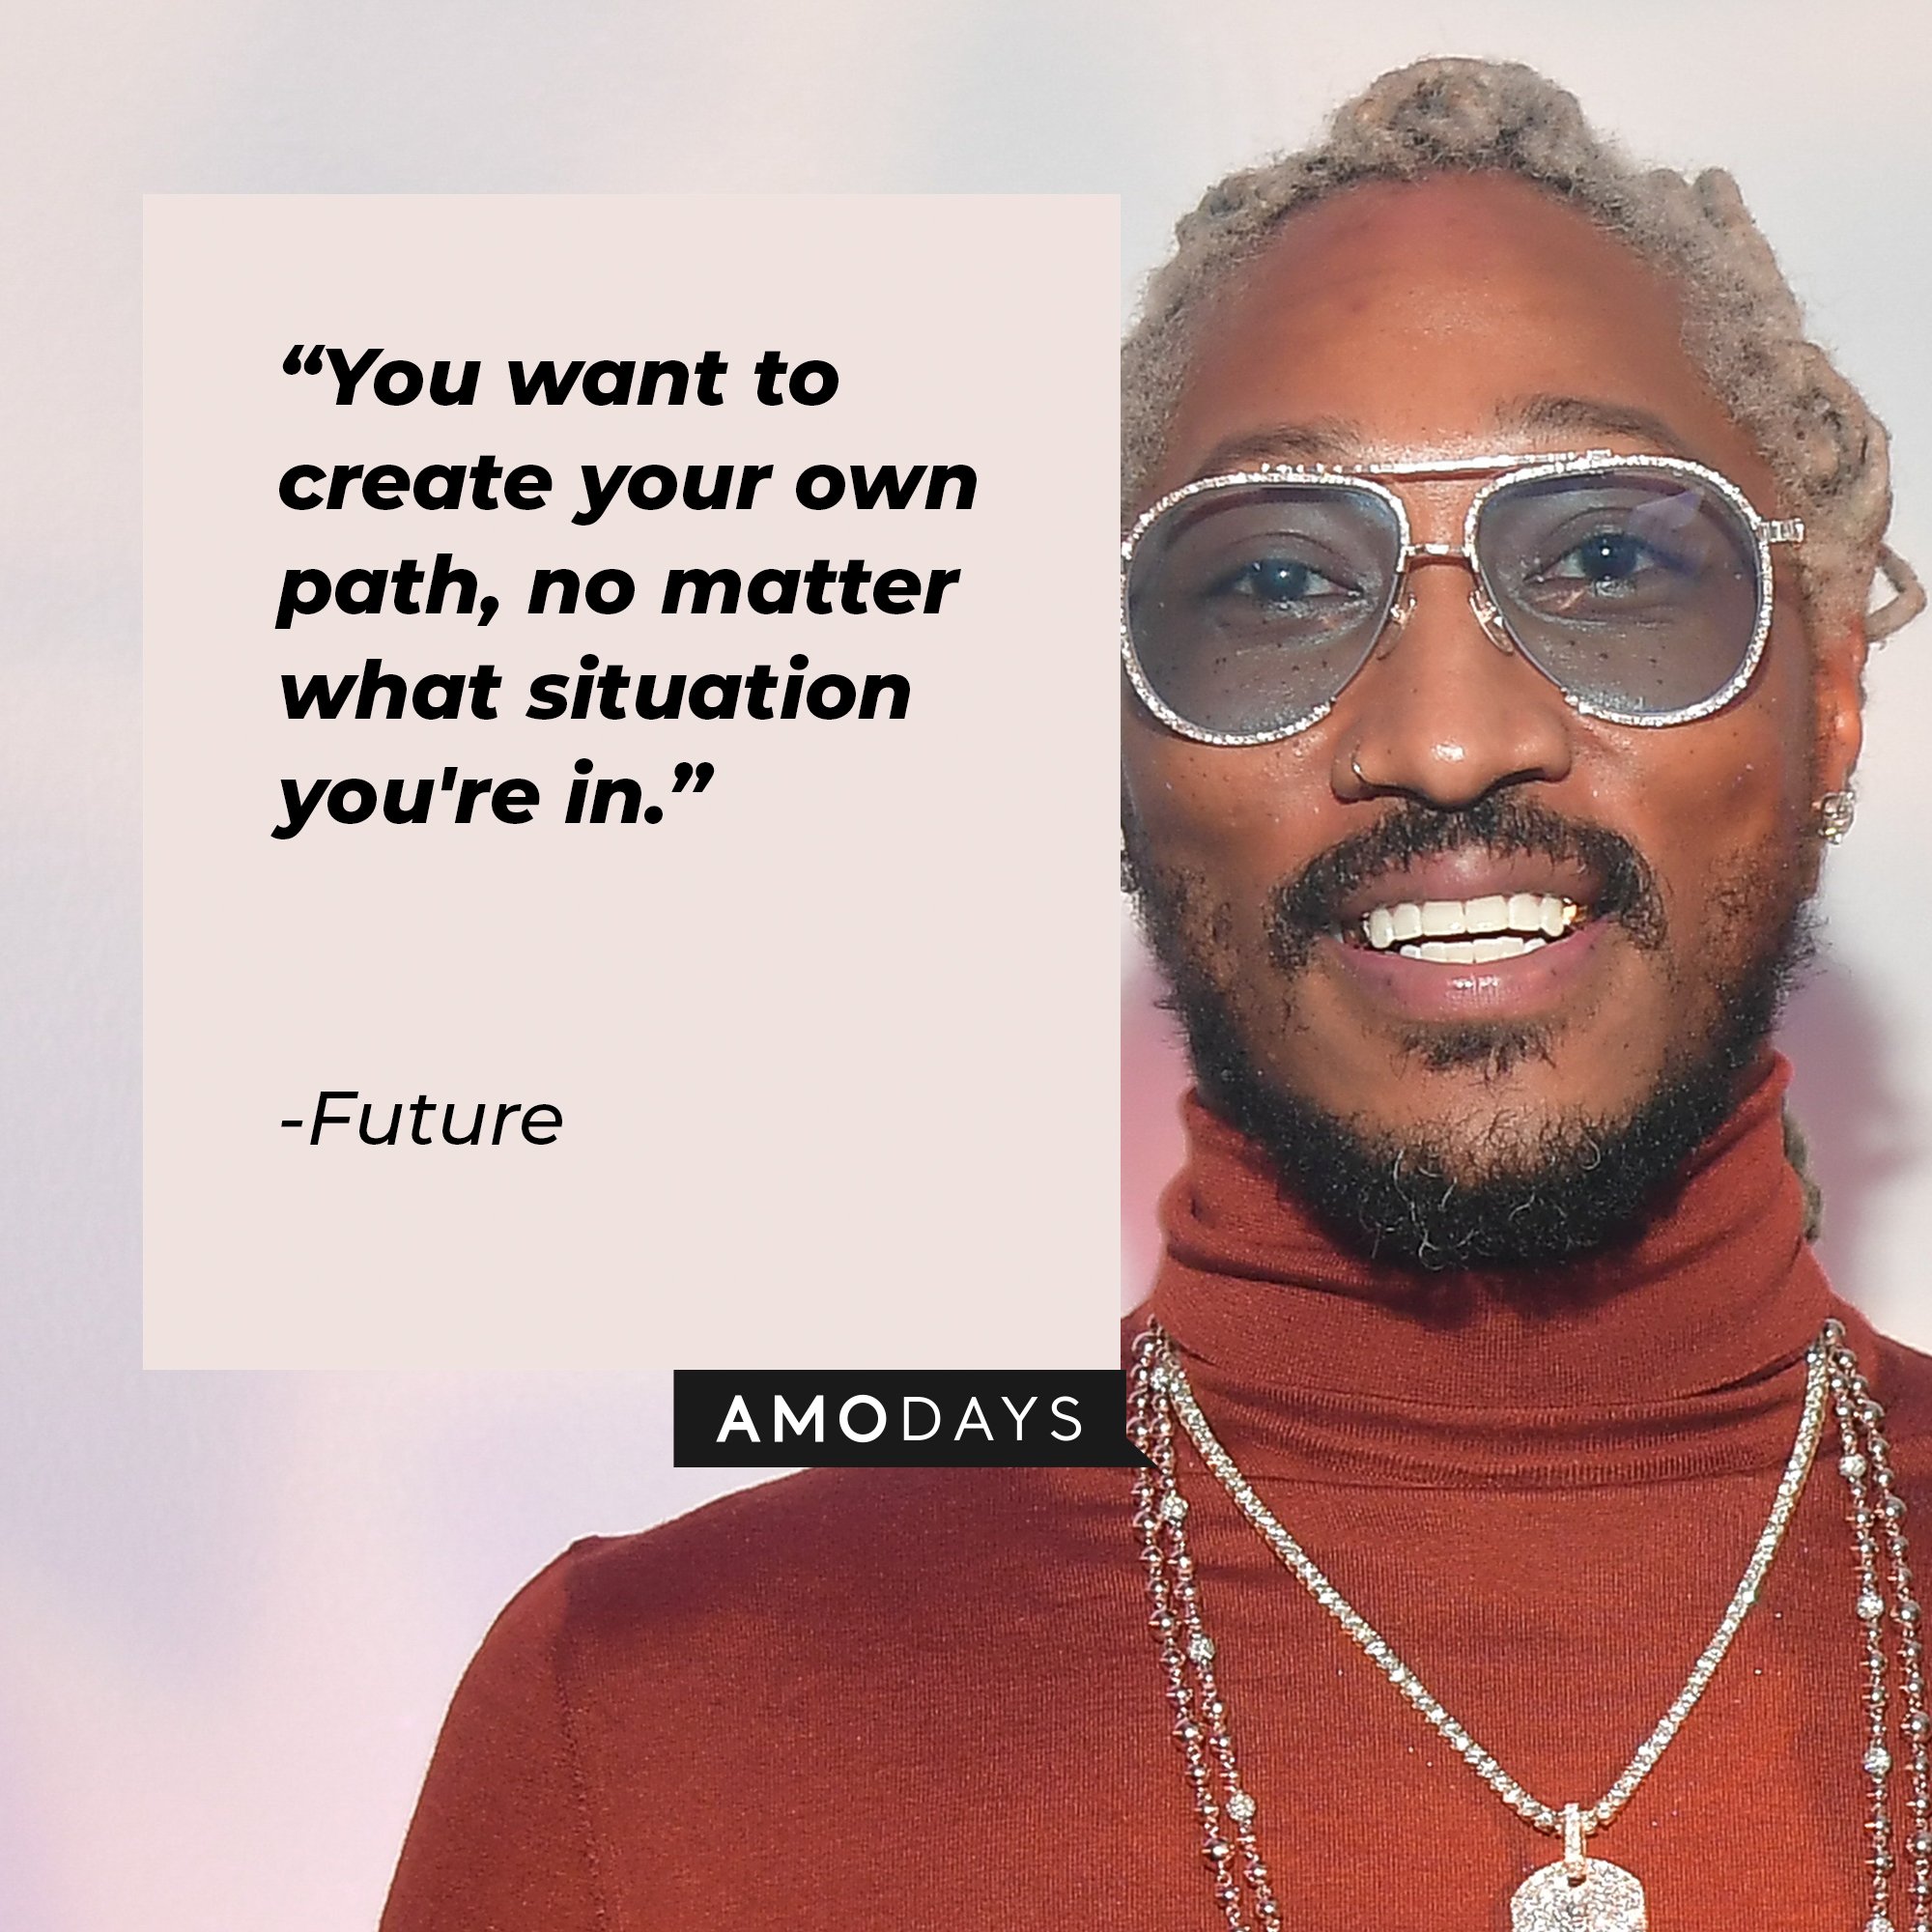 Future’s quote: "You want to create your own path, no matter what situation you're in." | Image: AmoDays